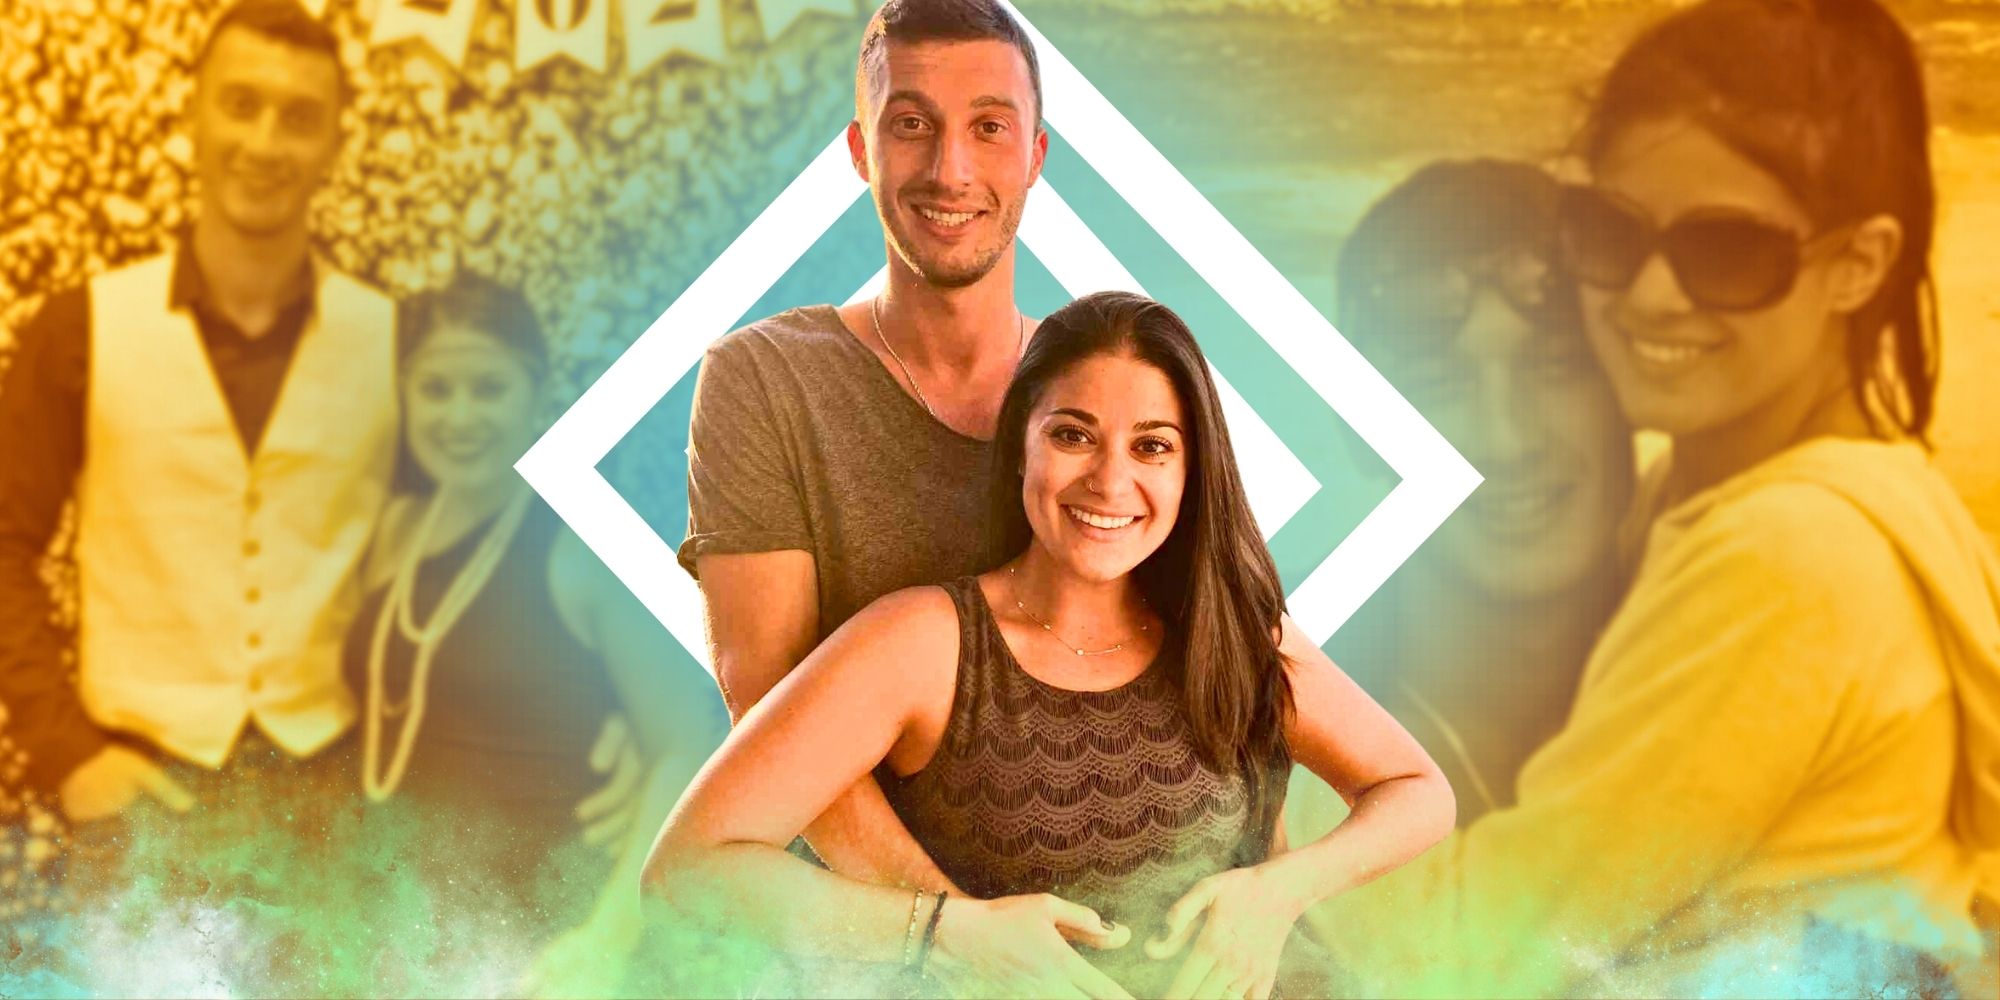 90 Day Fiance's Loren and Alexei Brovarnik hugging each other and smiling with yellow filtered background